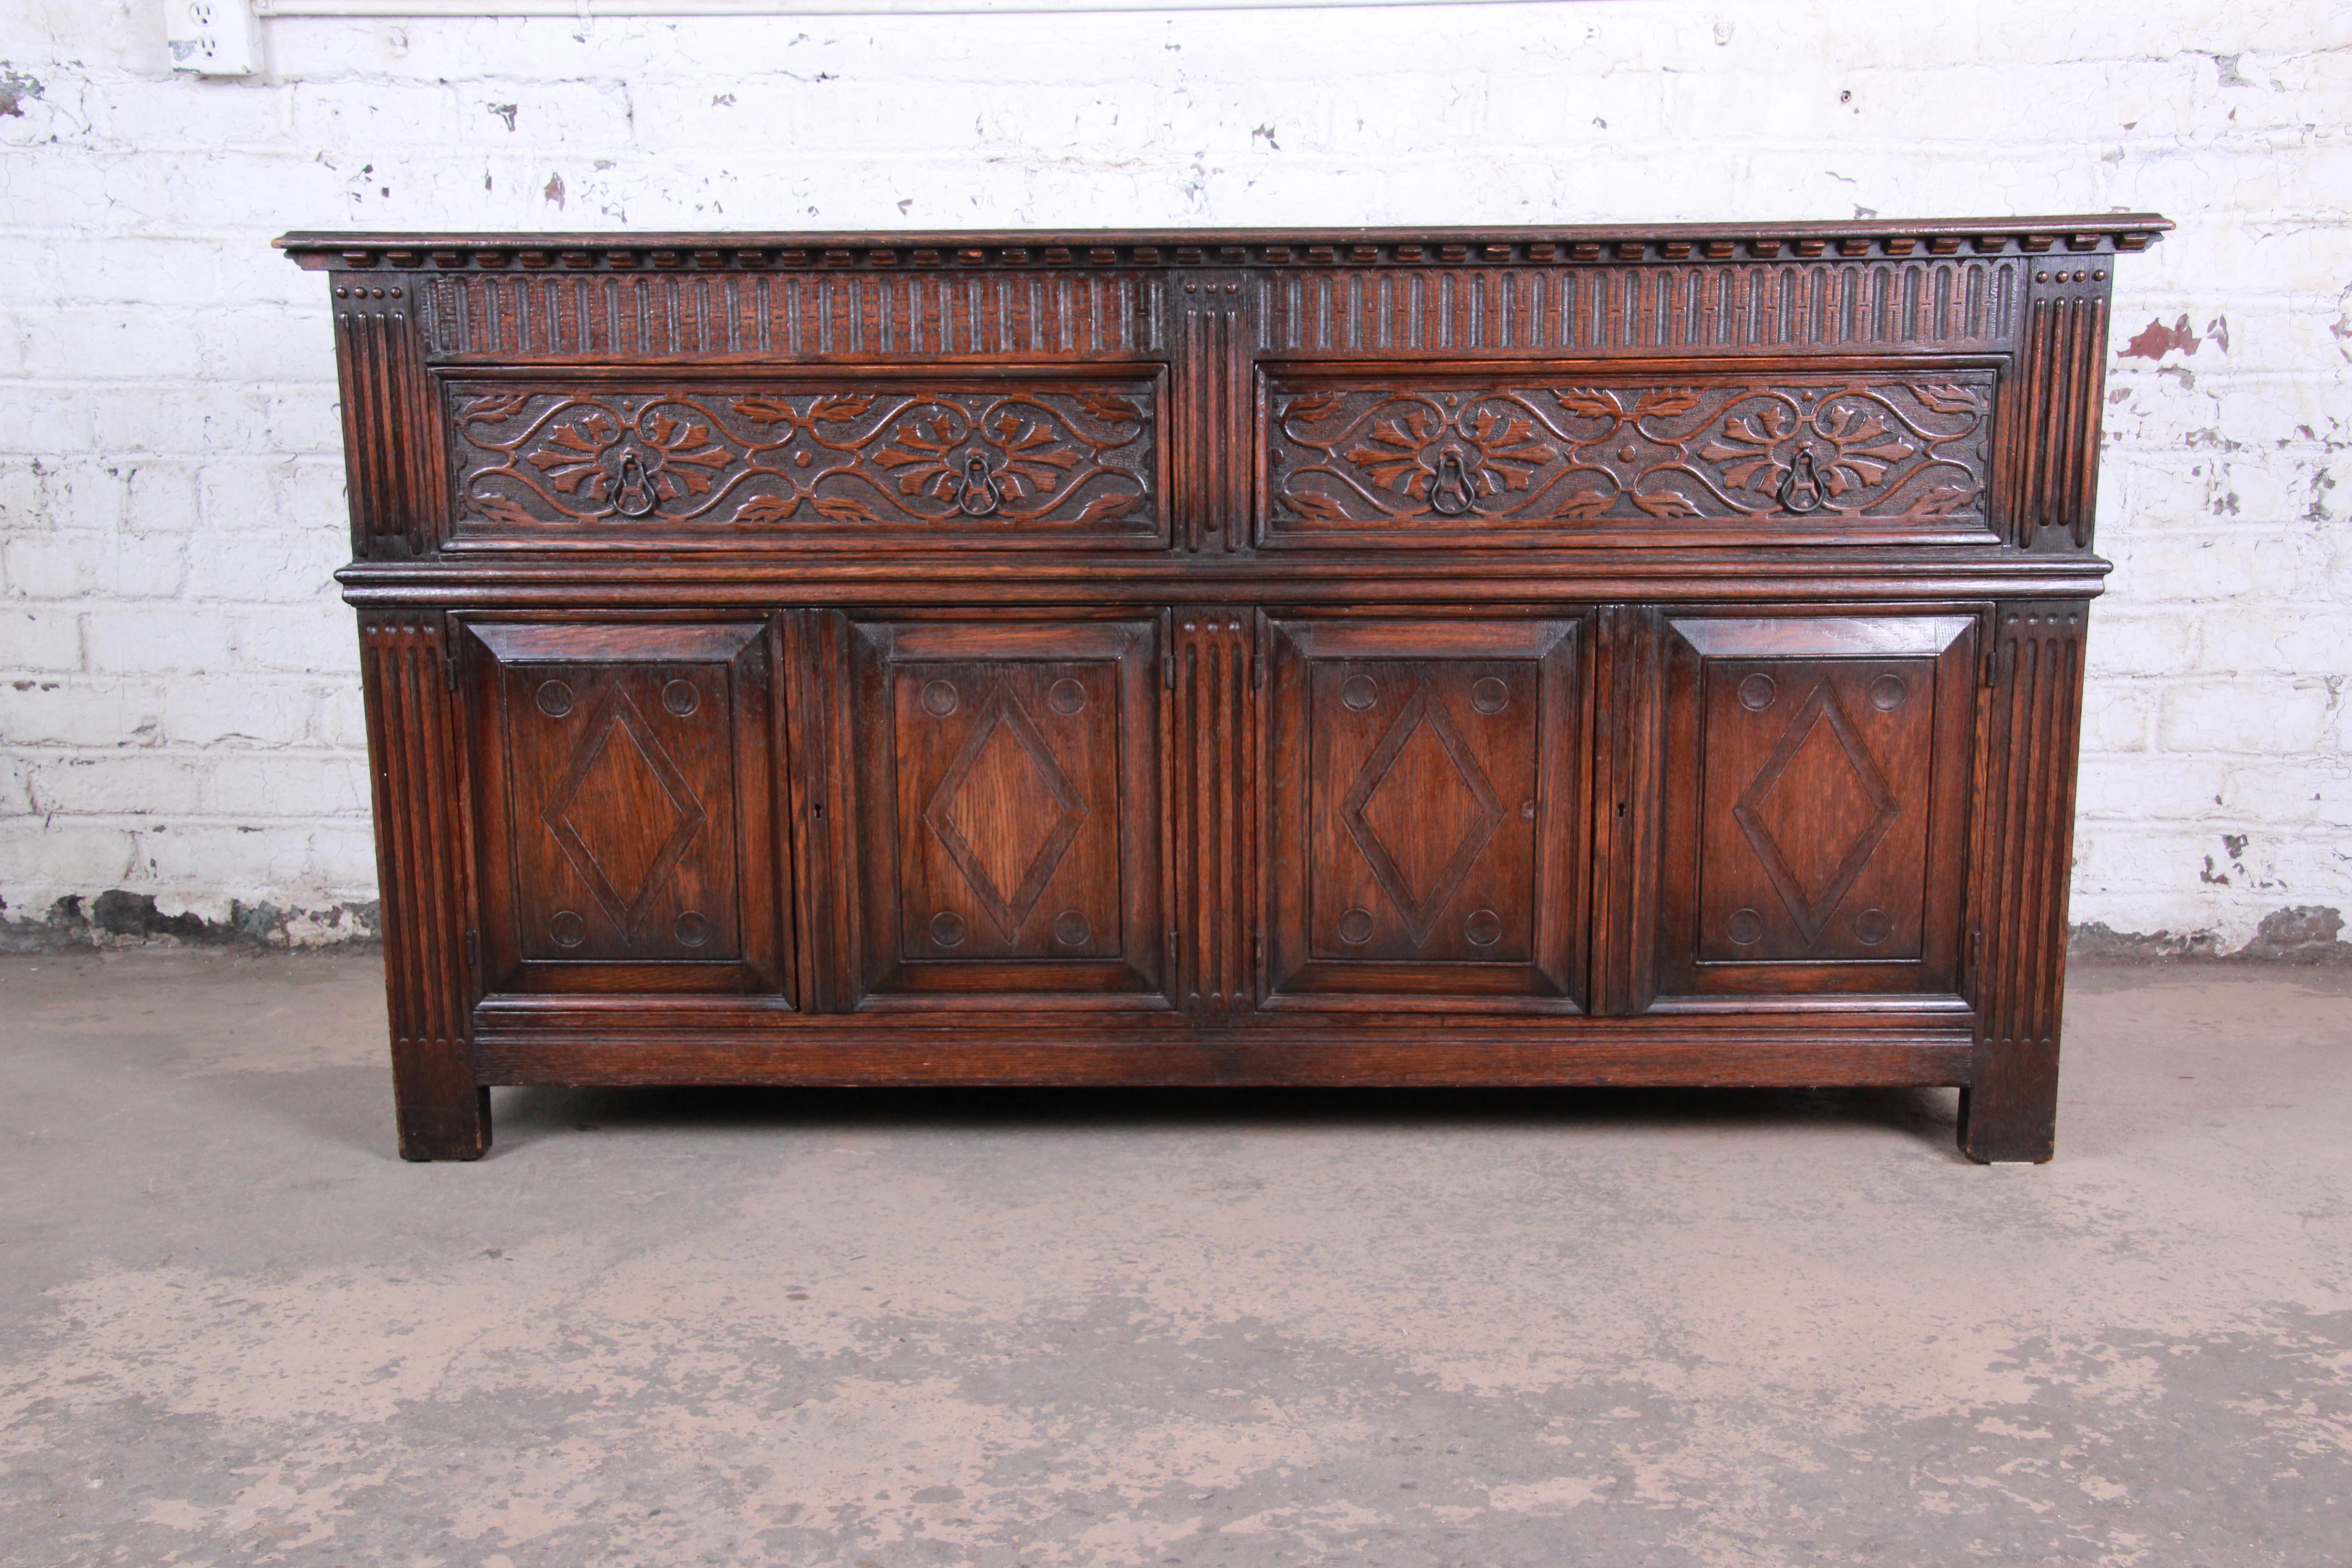 An exceptional antique carved oak sideboard or bar cabinet by Kensington Furniture Co. of New York, circa 1920s. The sideboard features solid oak construction with beautiful carved wood details. It offers ample storage. There are two deep dovetailed